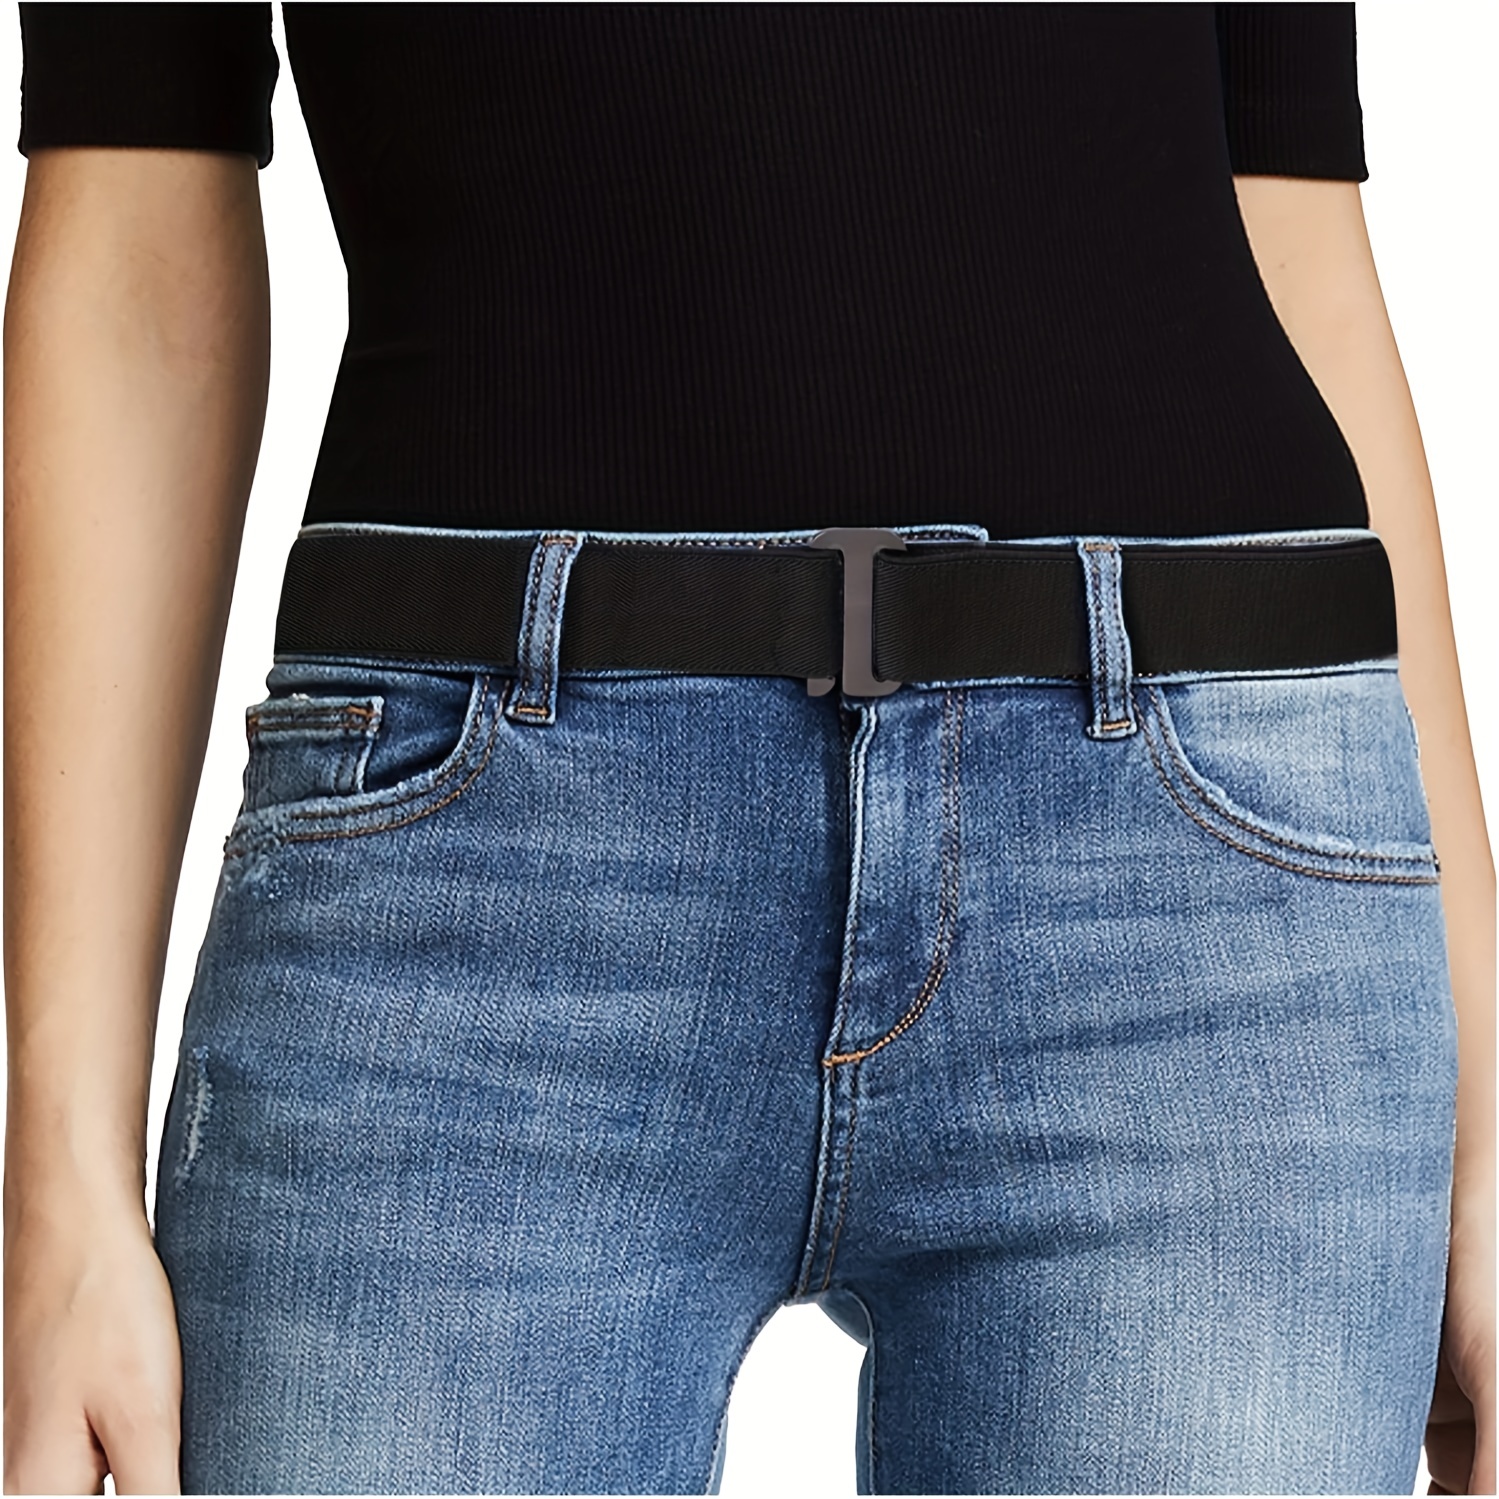 

1/2pcs Women Stretch Belt Solid Color Invisible Elastic Belt With Flat Buckle For Jeans Pants Dresses